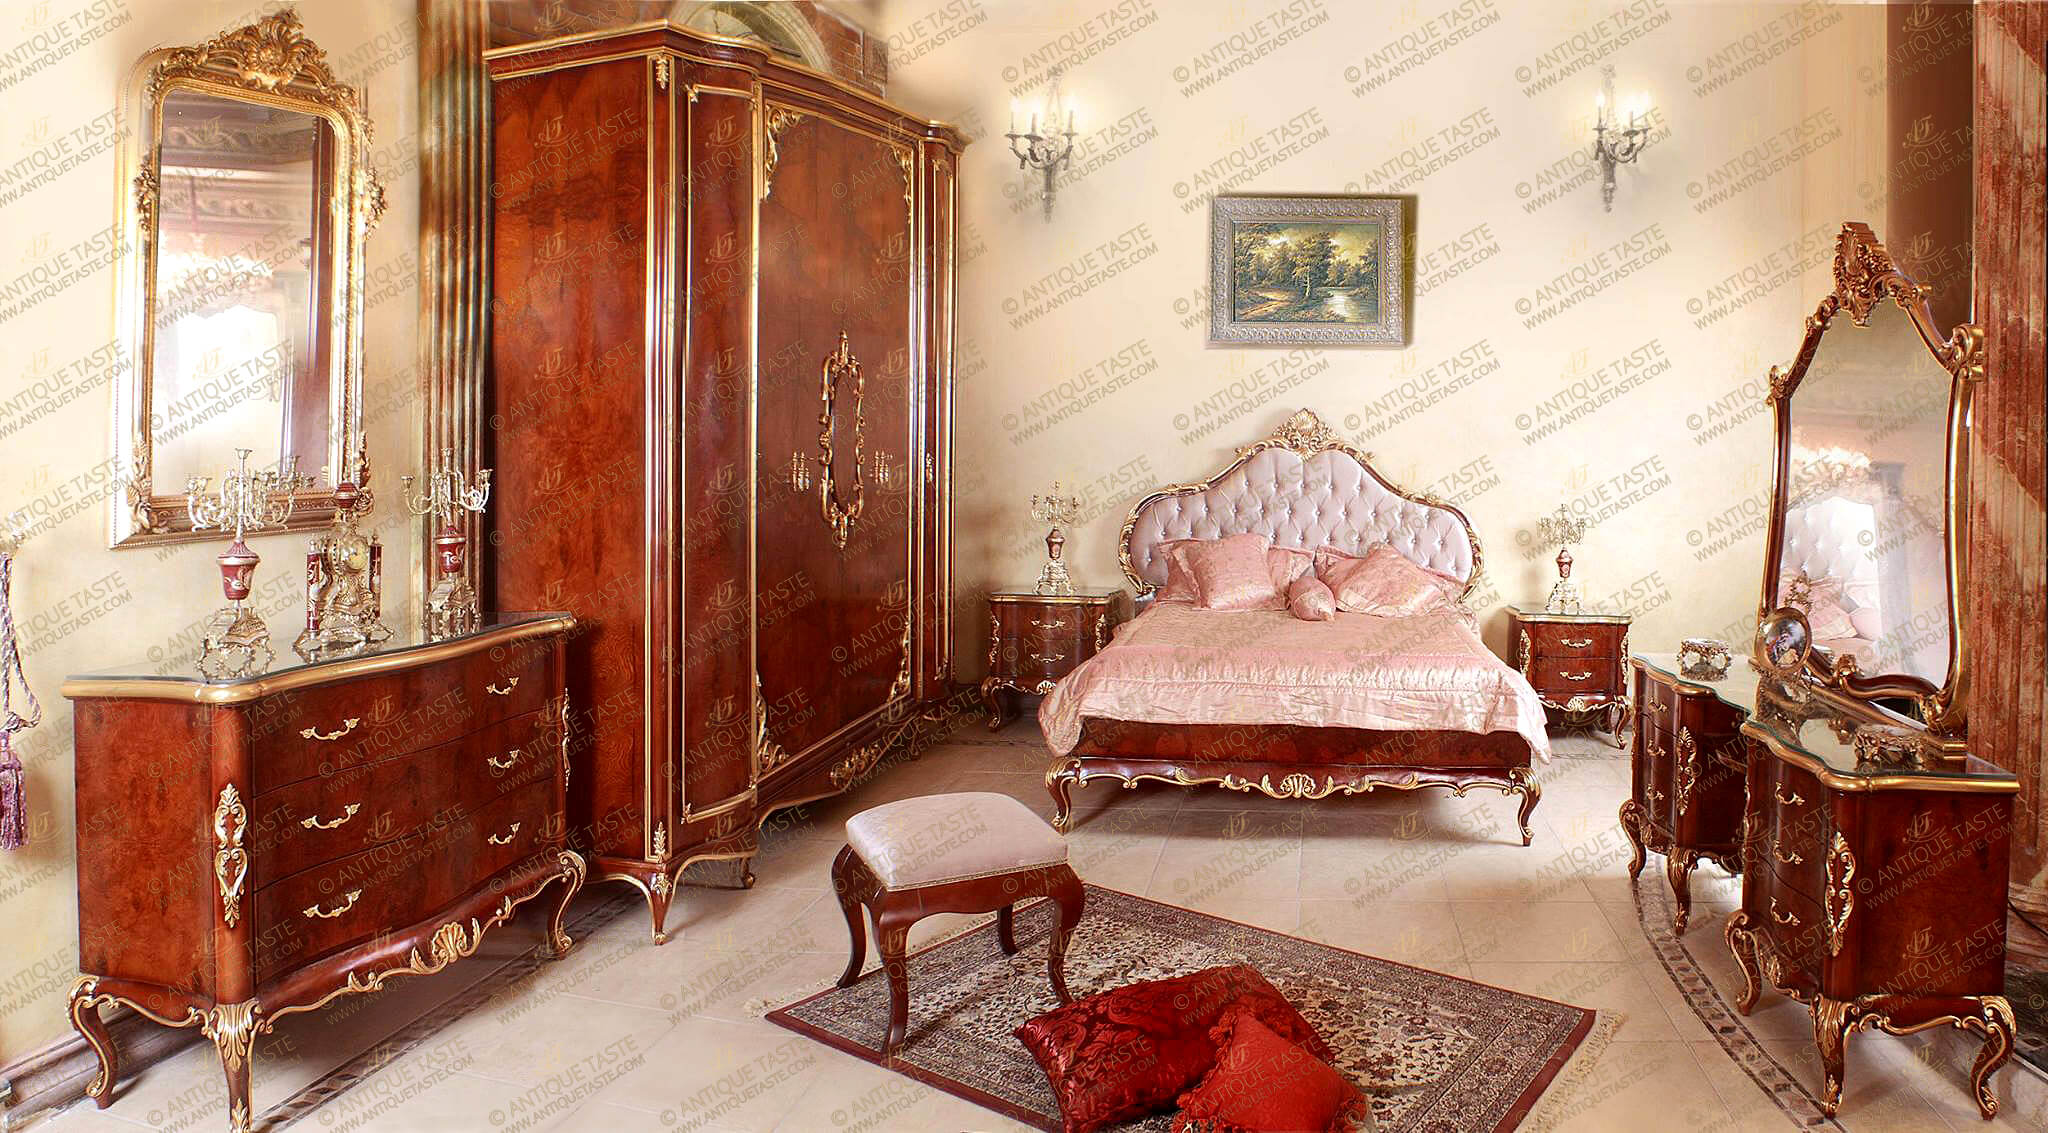 A stupendous French Louis XV Period Rococo style Luxury Bedroom Suite; hand carved, French foil gilded, ormolu mounted and veneer inlaid; fancifully and richly carved with Rocaille elements, acanthus leaves, scrolling foliage, shells and S works; the fine set is comprising of one bed, one armoire, one dressing table with mirror, one dressing table chair, one chest of drawers and two nightstands.